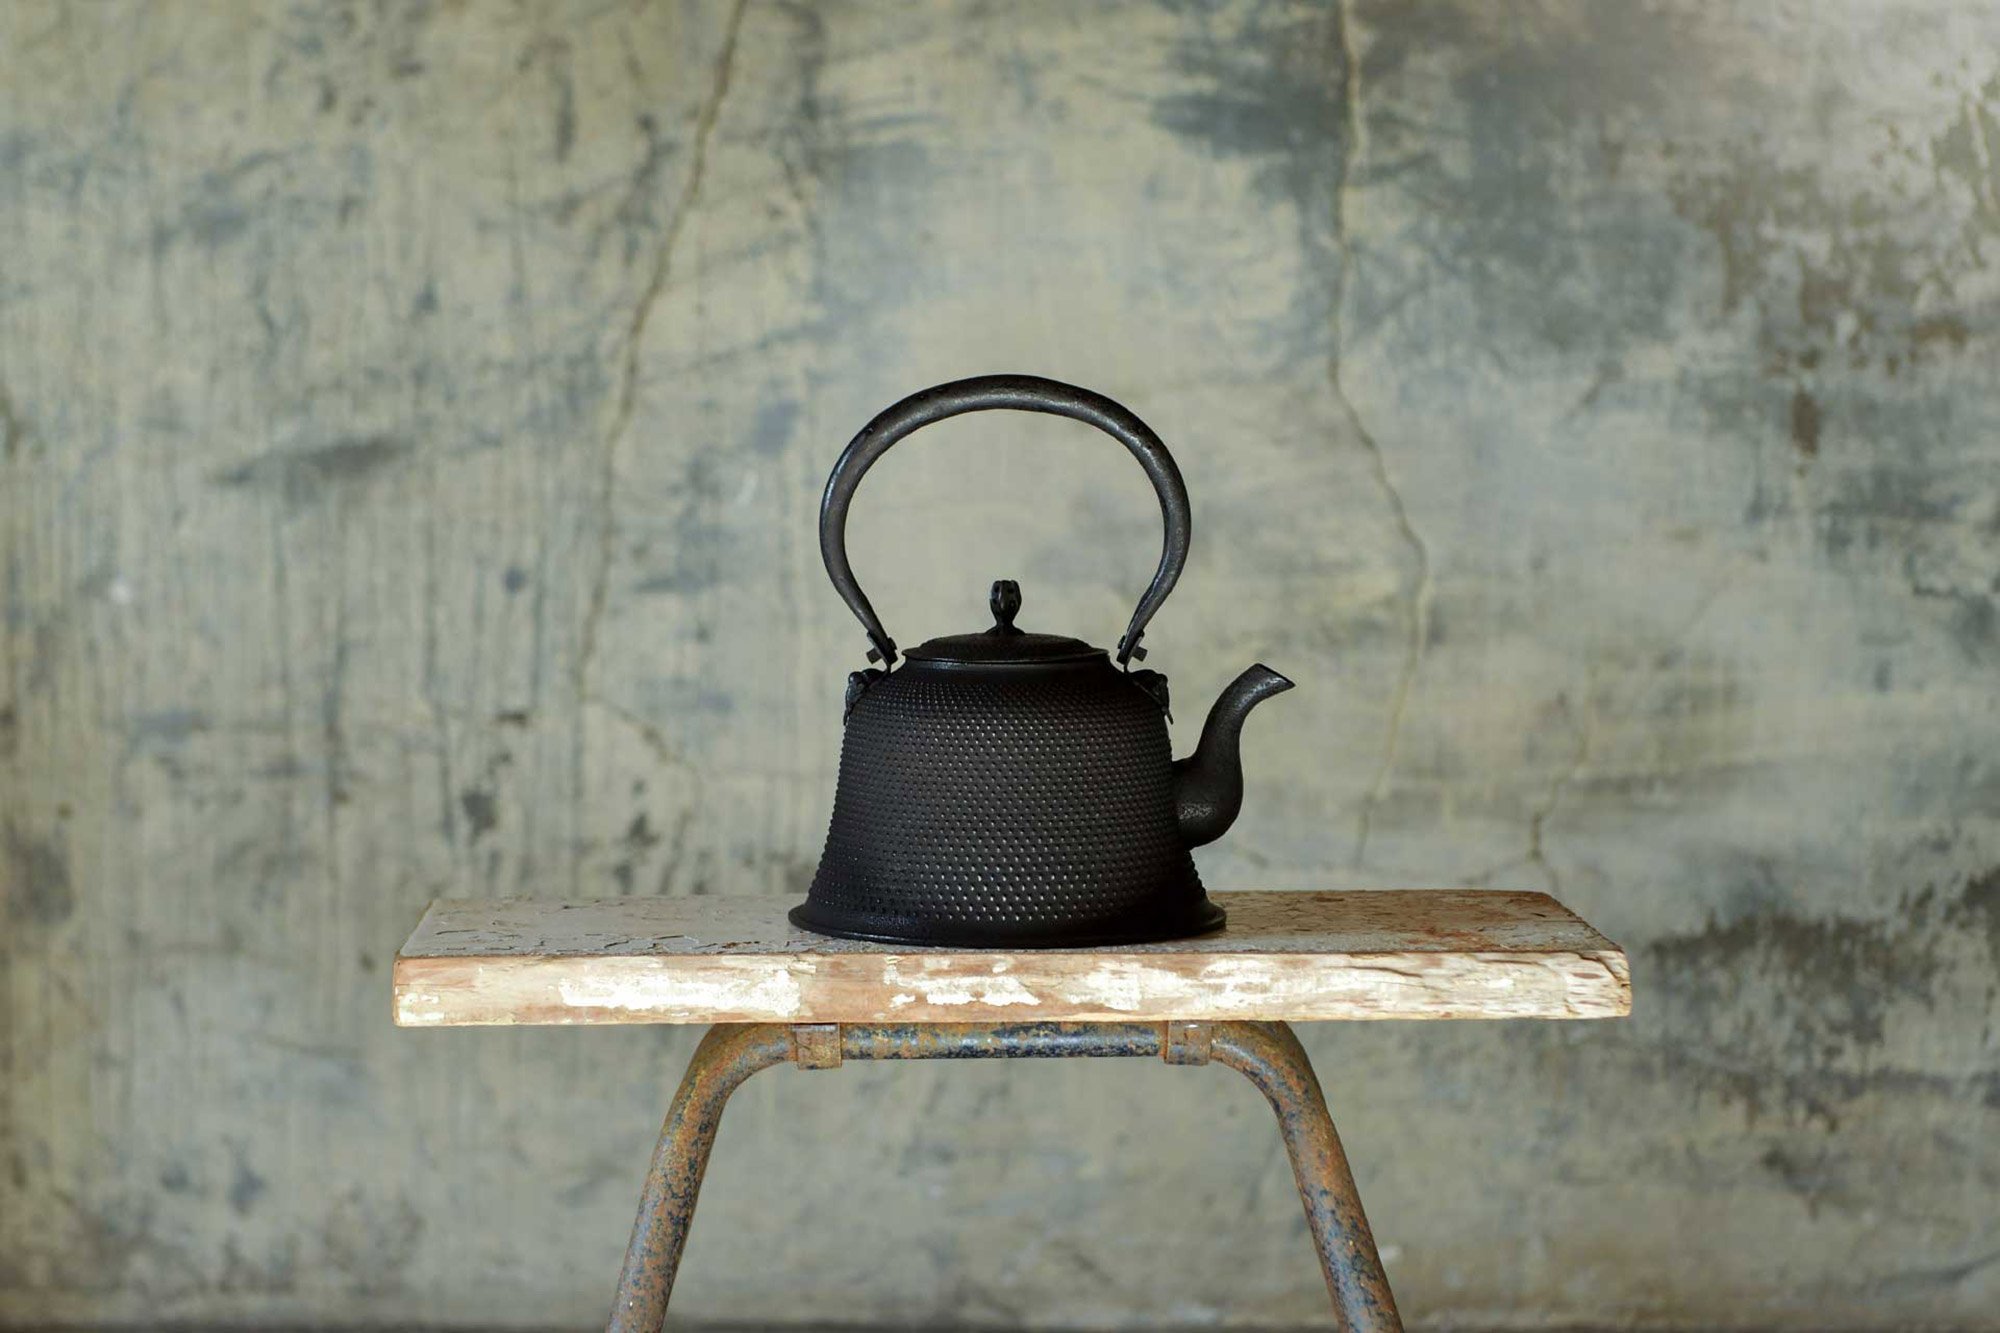 Cast Iron Teapot Green with Silver Accents